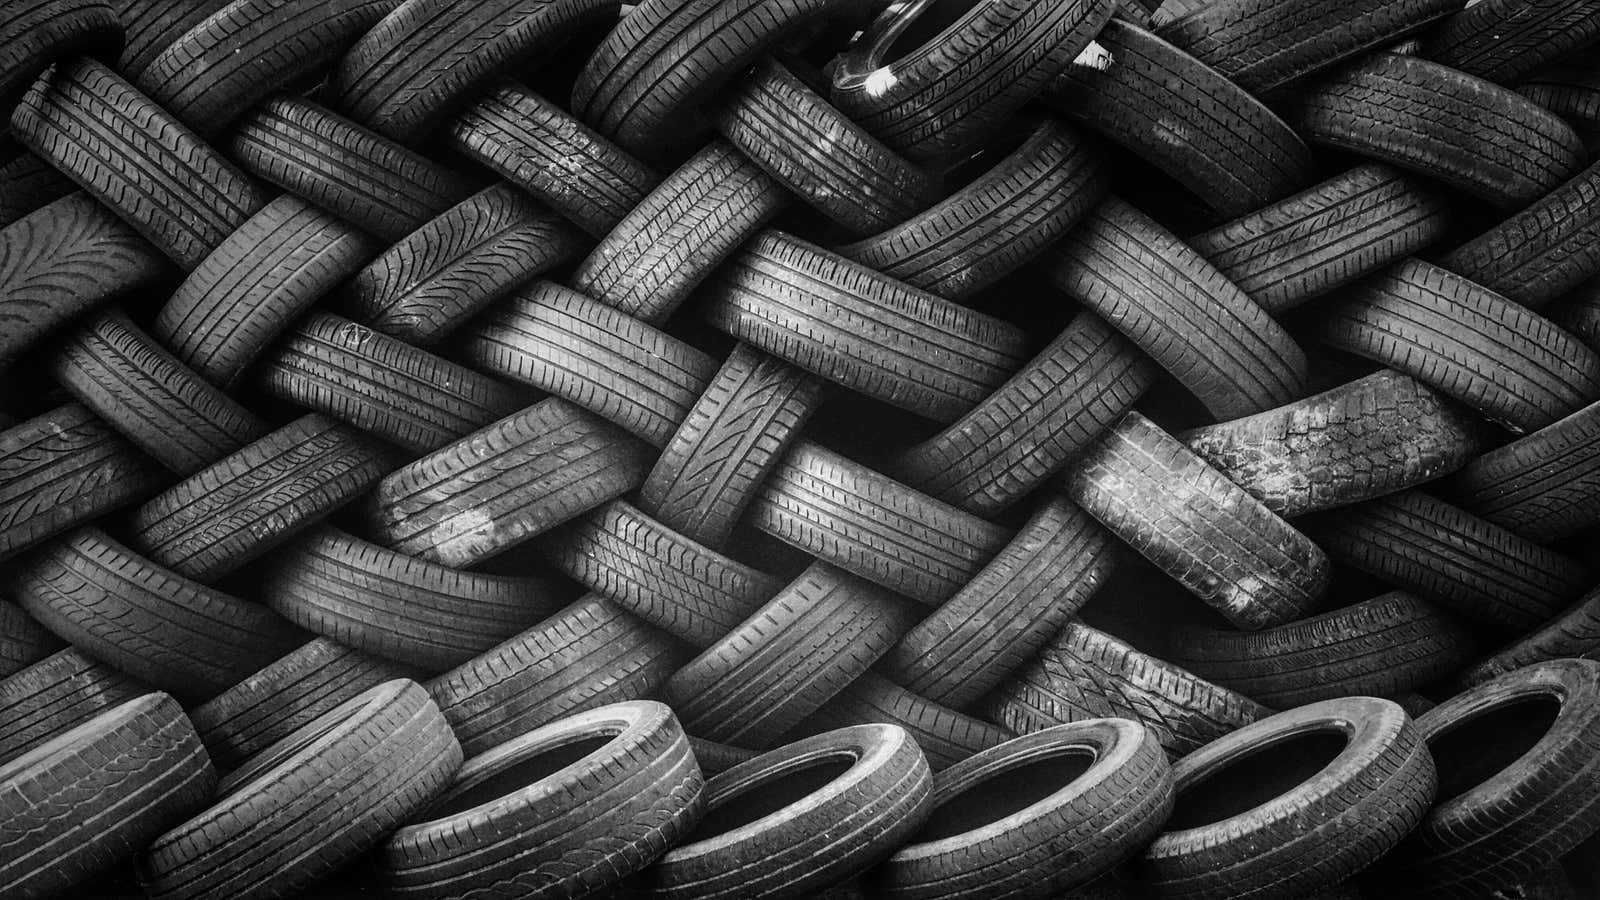 There are two to three billion old tires languishing in landfills in the US